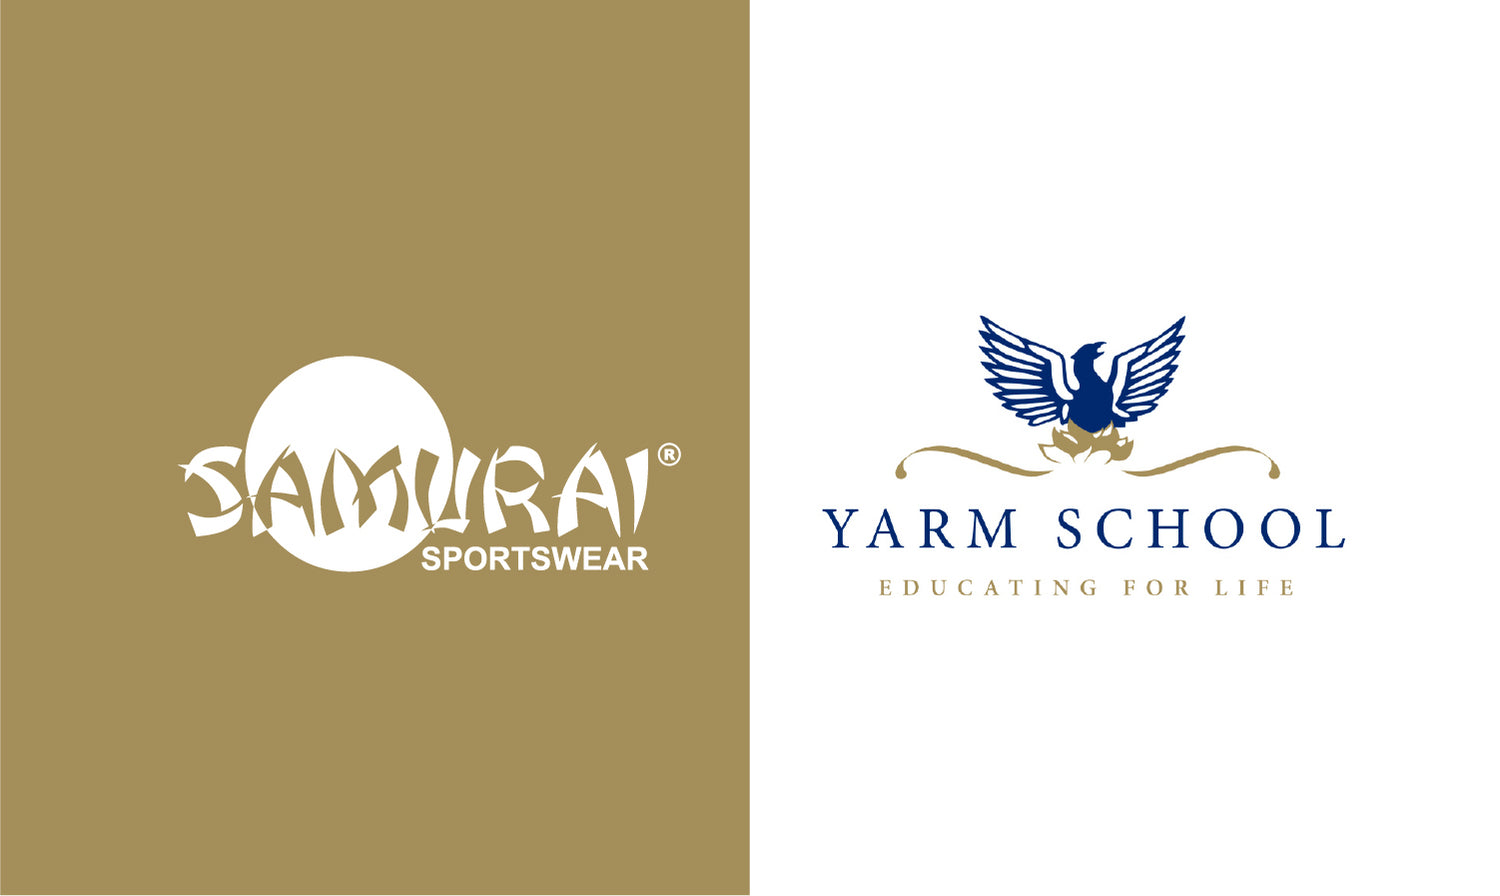 Samurai extends our relationship with Yarm School.